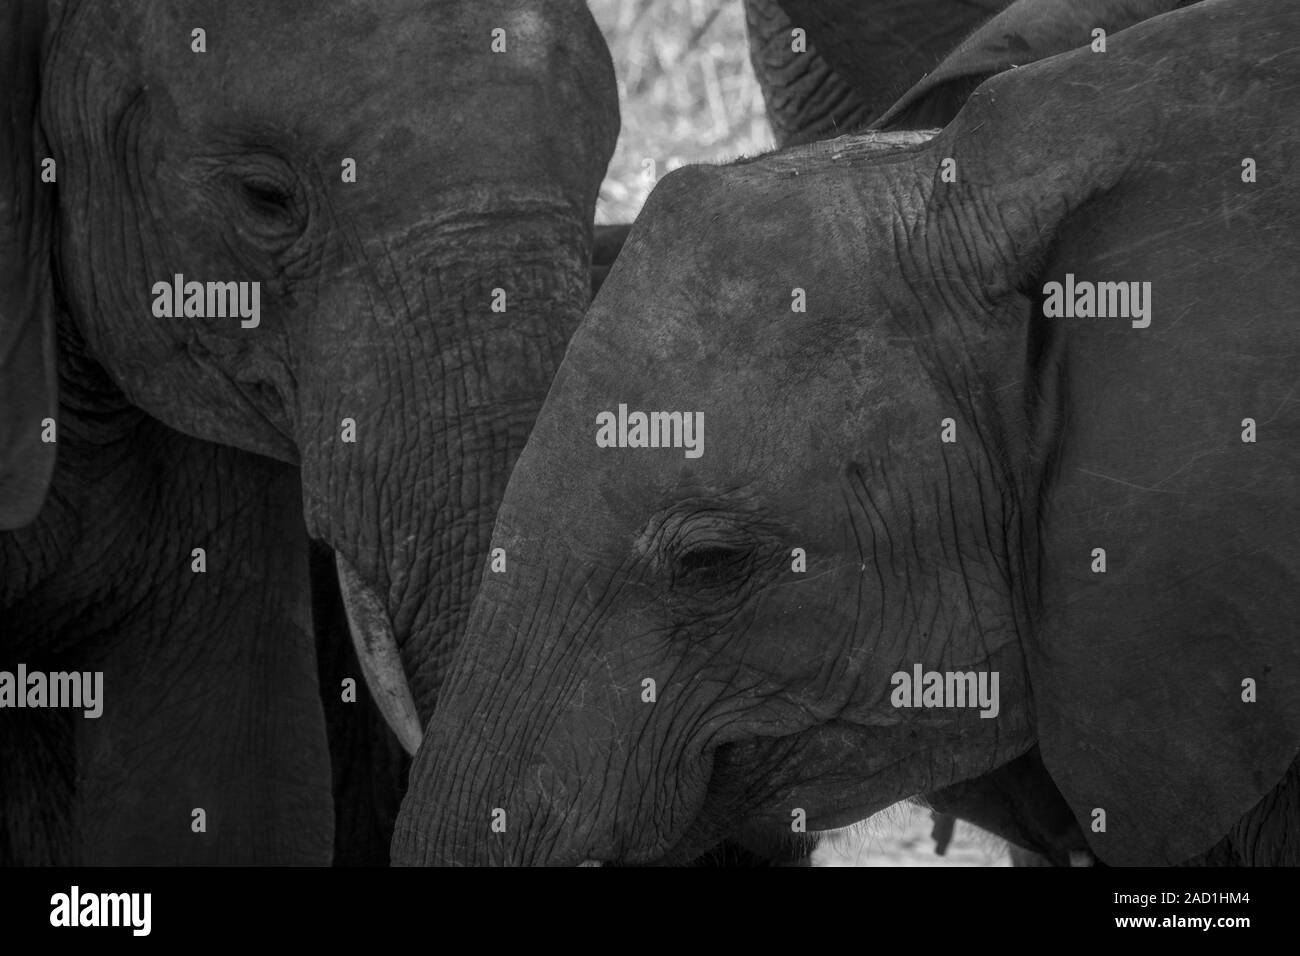 Close up of two Elephants in black and white. Stock Photo